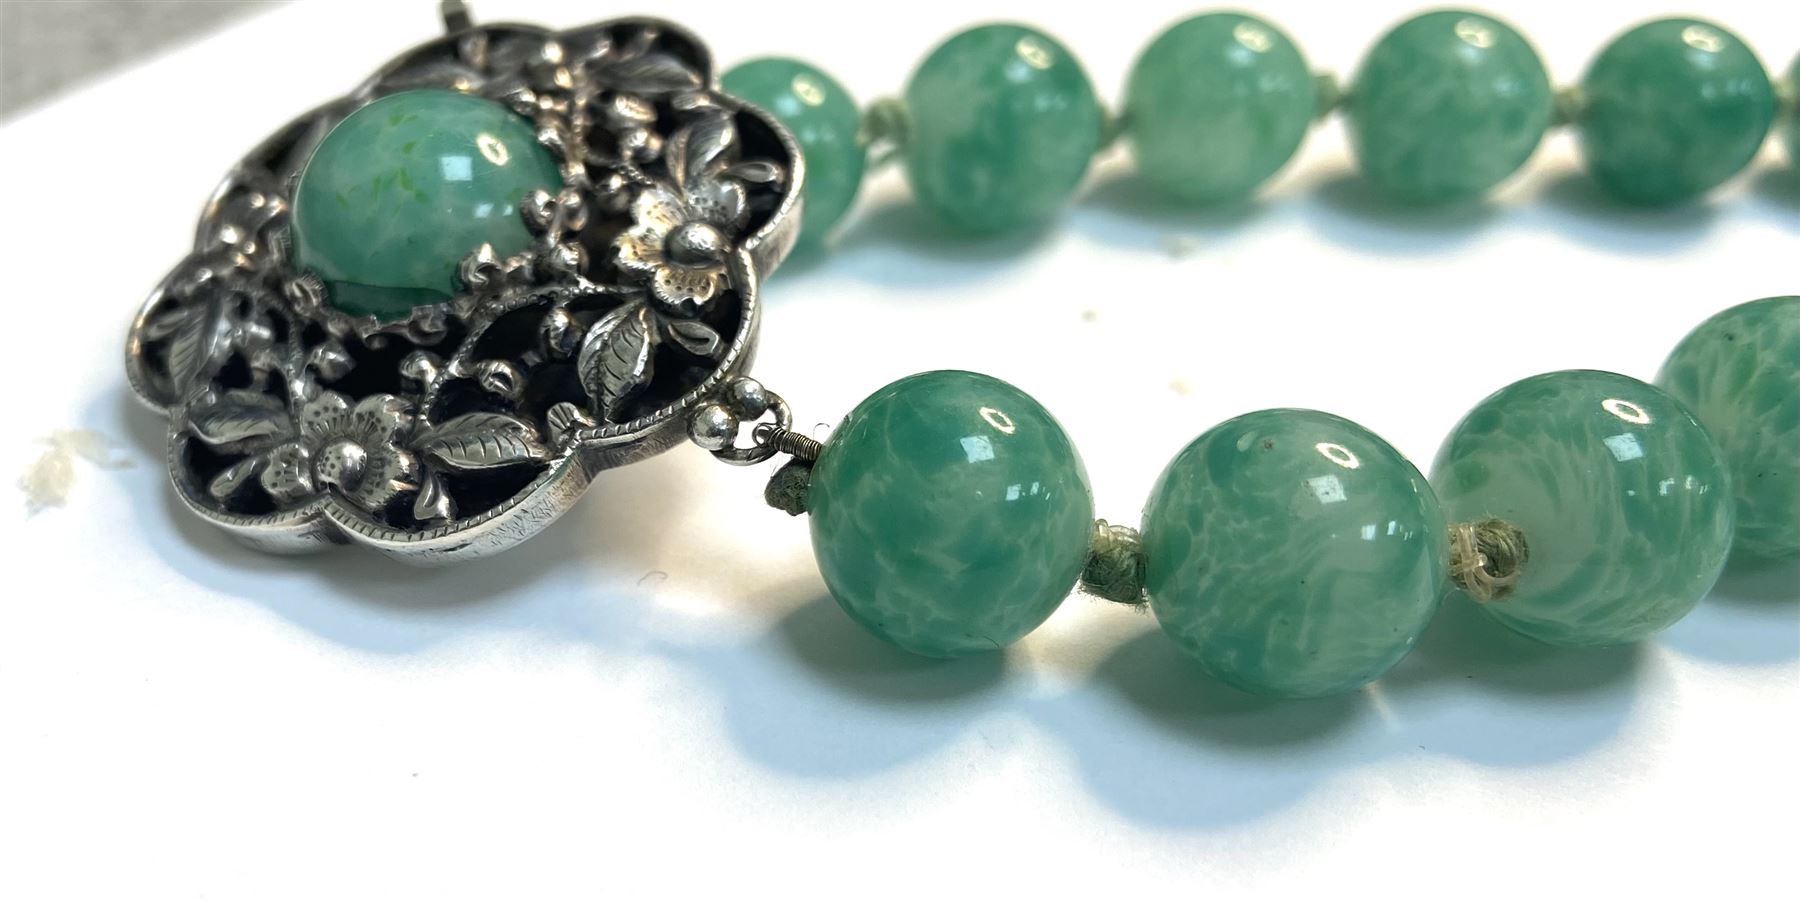 Chinese jade bead necklace with silver open work clasp with a cabochon greenstone/possibly jade bead - Image 2 of 7